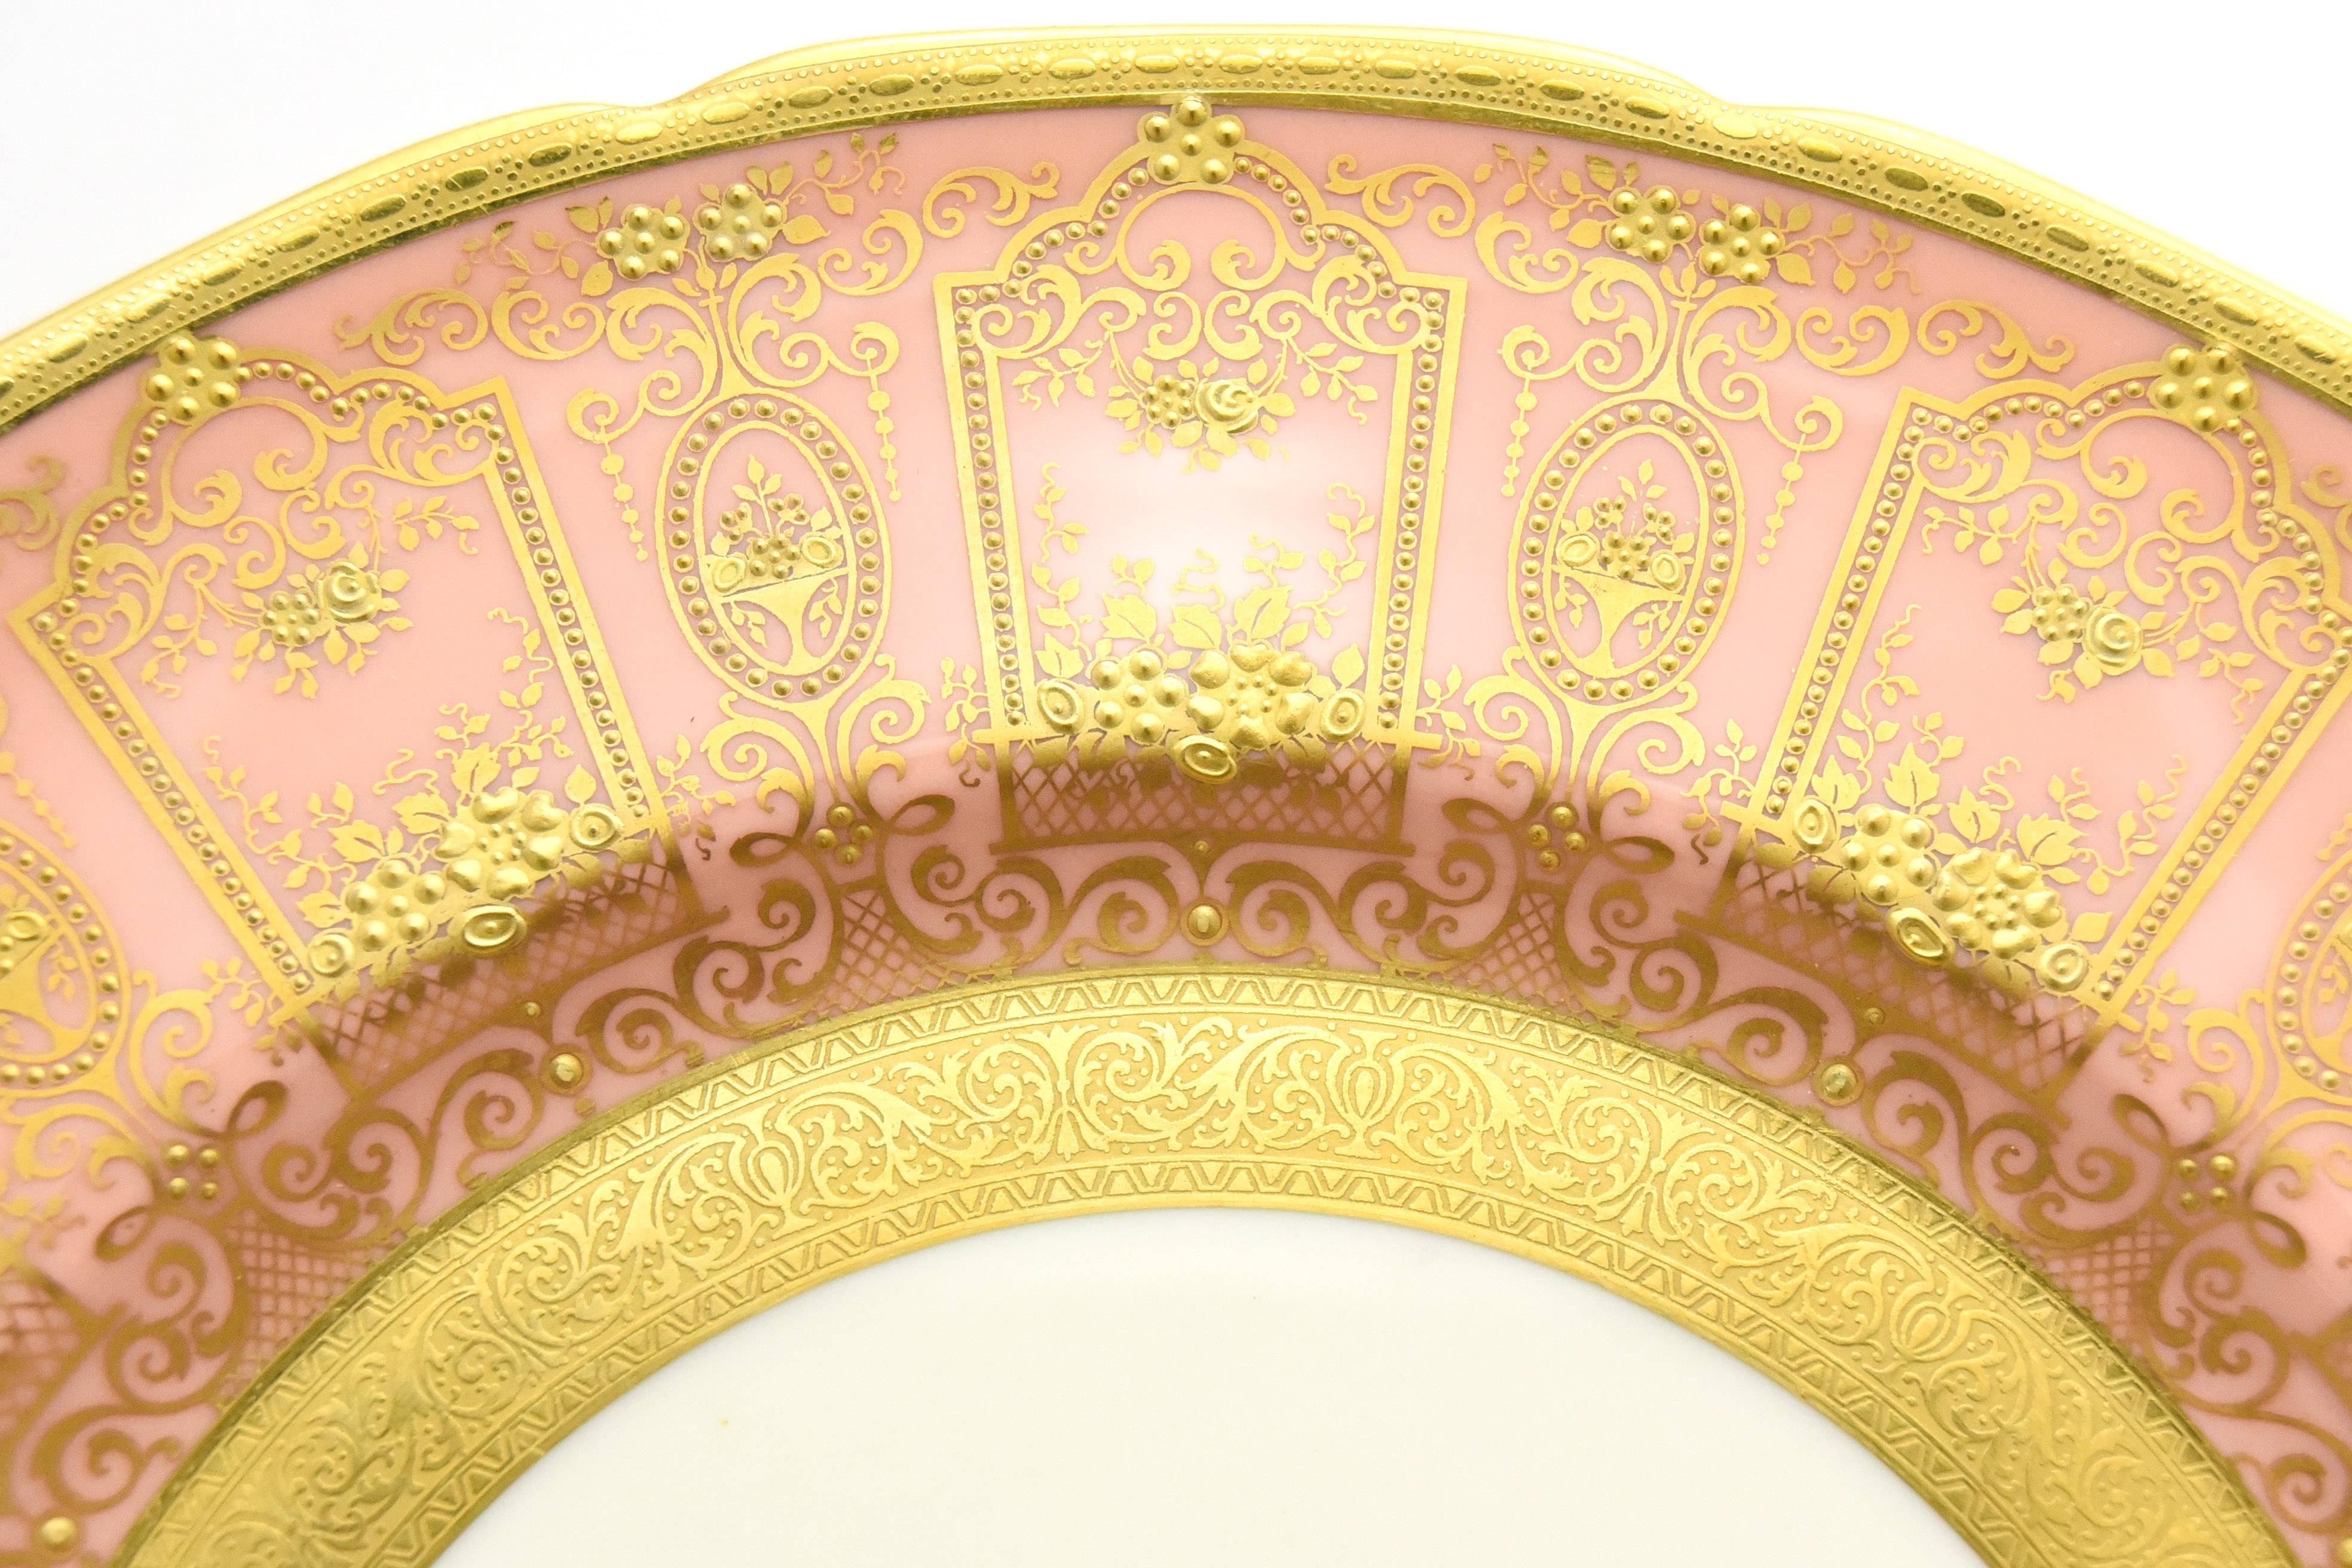 Gilt Set of 12 Pink/Rose Lenox Dinner Plates with Neoclassical Raised Paste Gold 